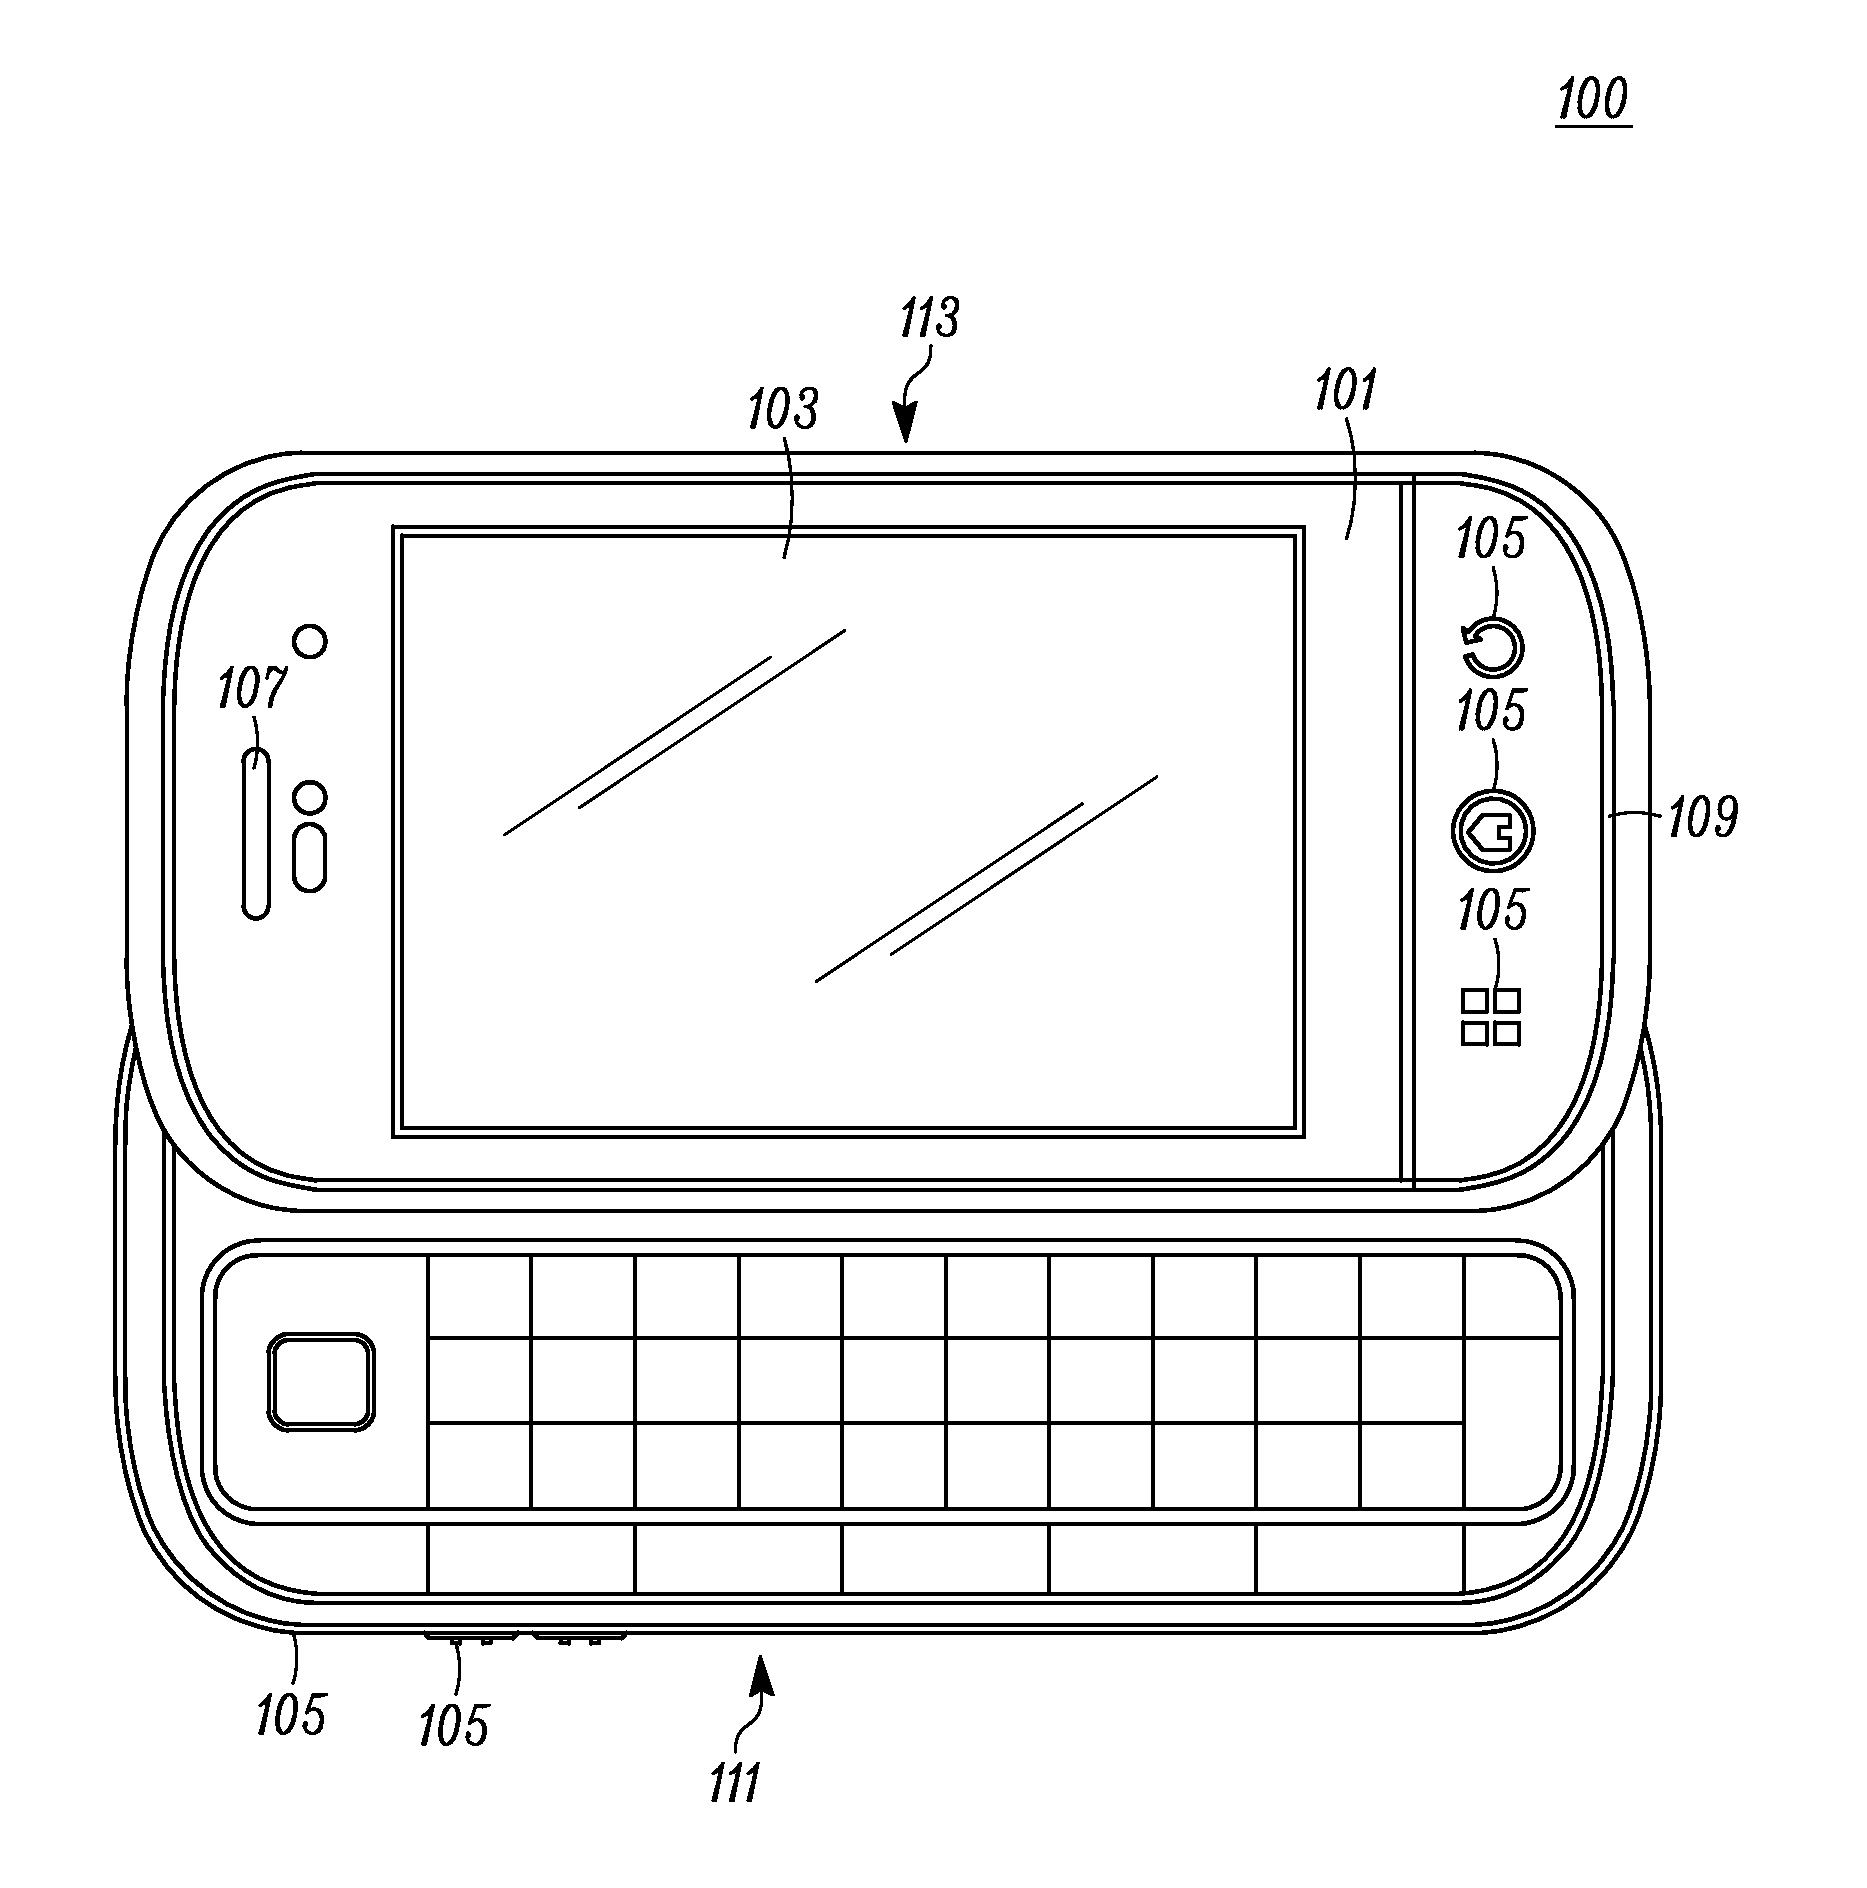 Method for an Electronic Device for Providing Group Information Associated with a Group of Contacts